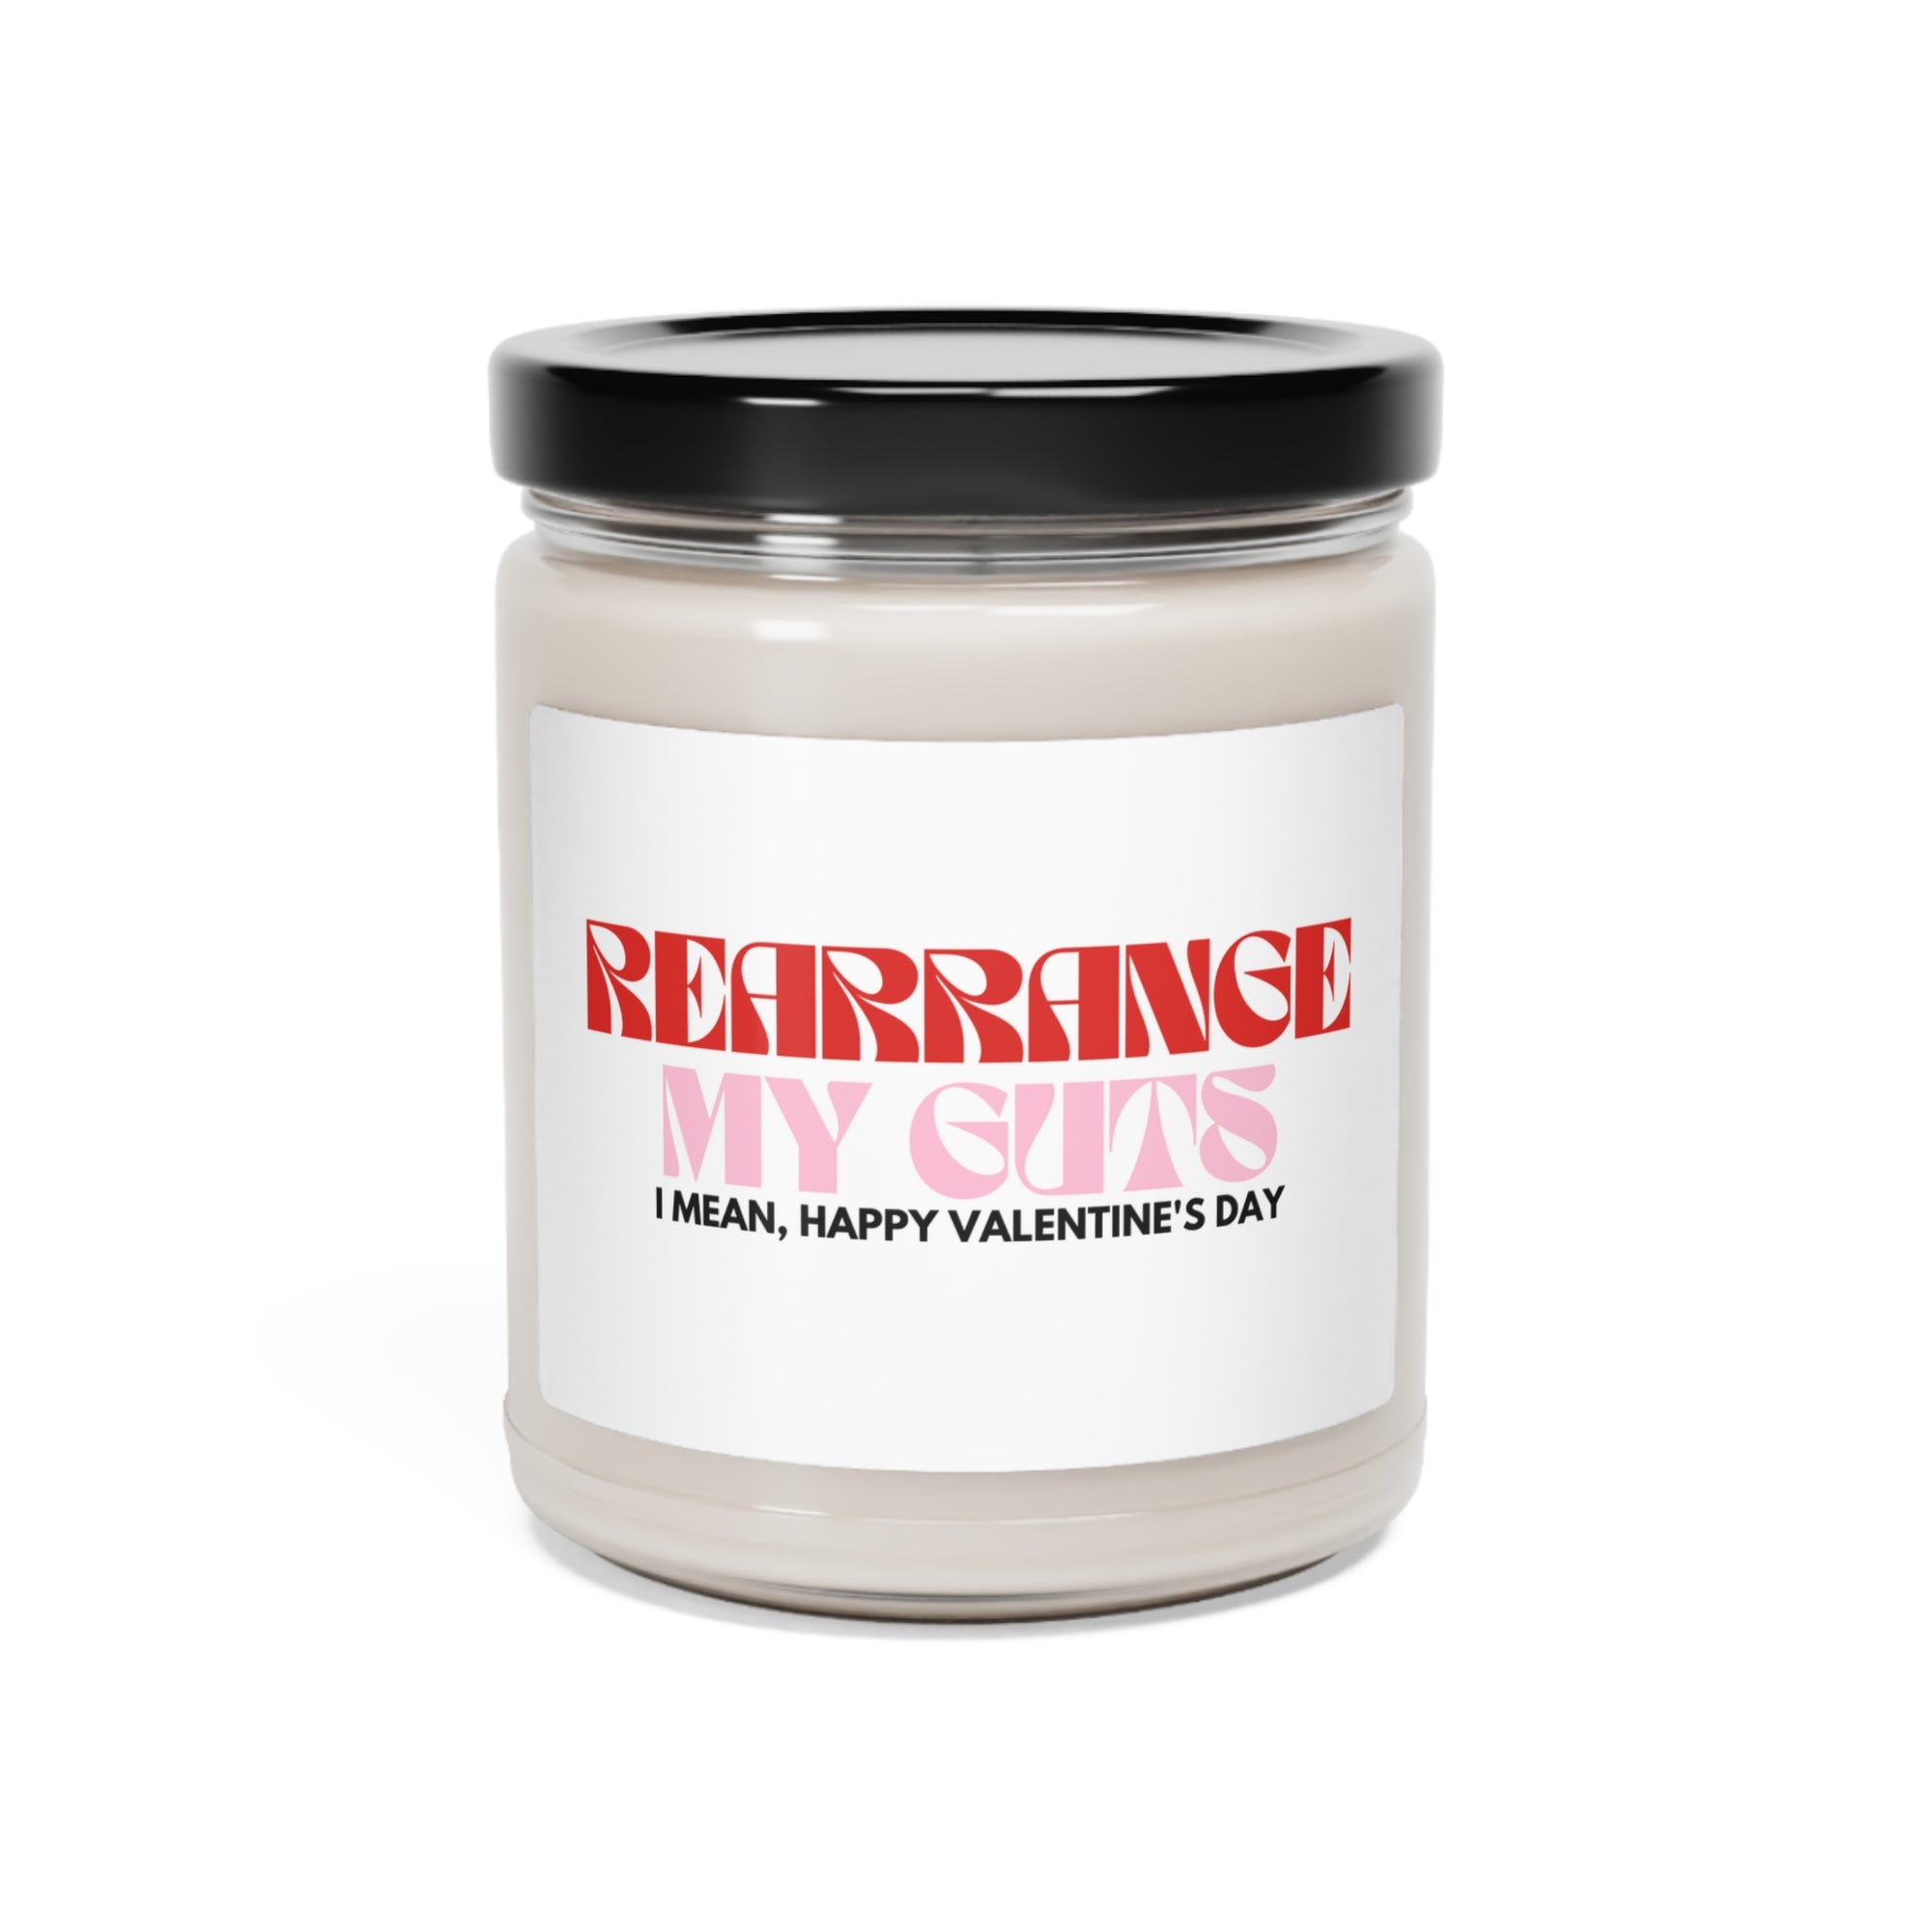 Rearrange My Guts Valentine's Day Candle